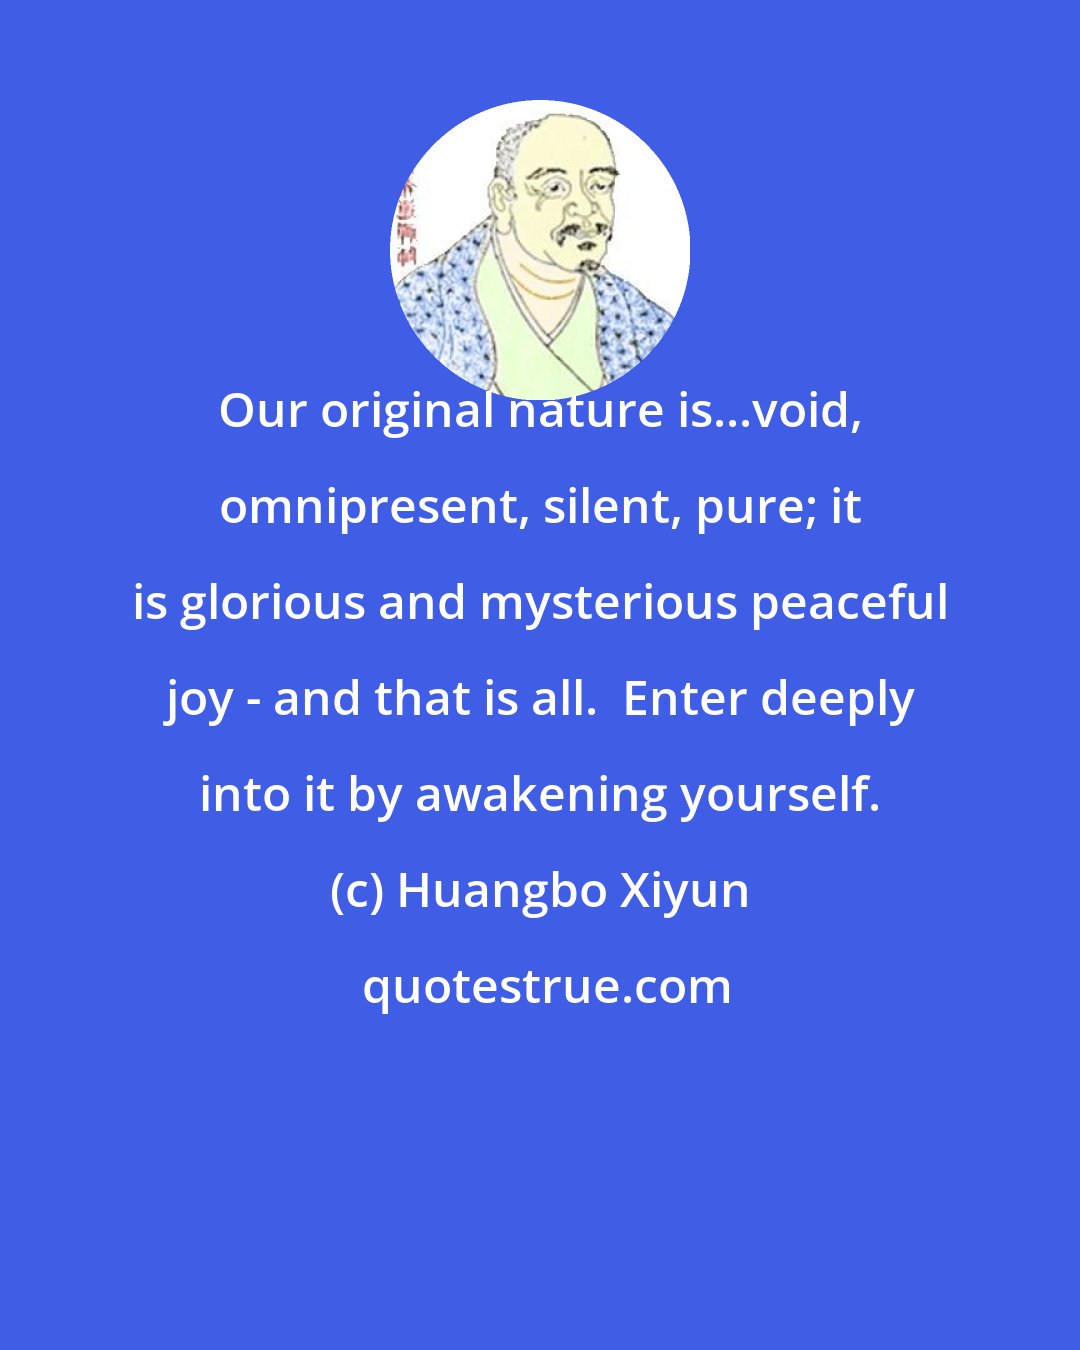 Huangbo Xiyun: Our original nature is...void, omnipresent, silent, pure; it is glorious and mysterious peaceful joy - and that is all.  Enter deeply into it by awakening yourself.